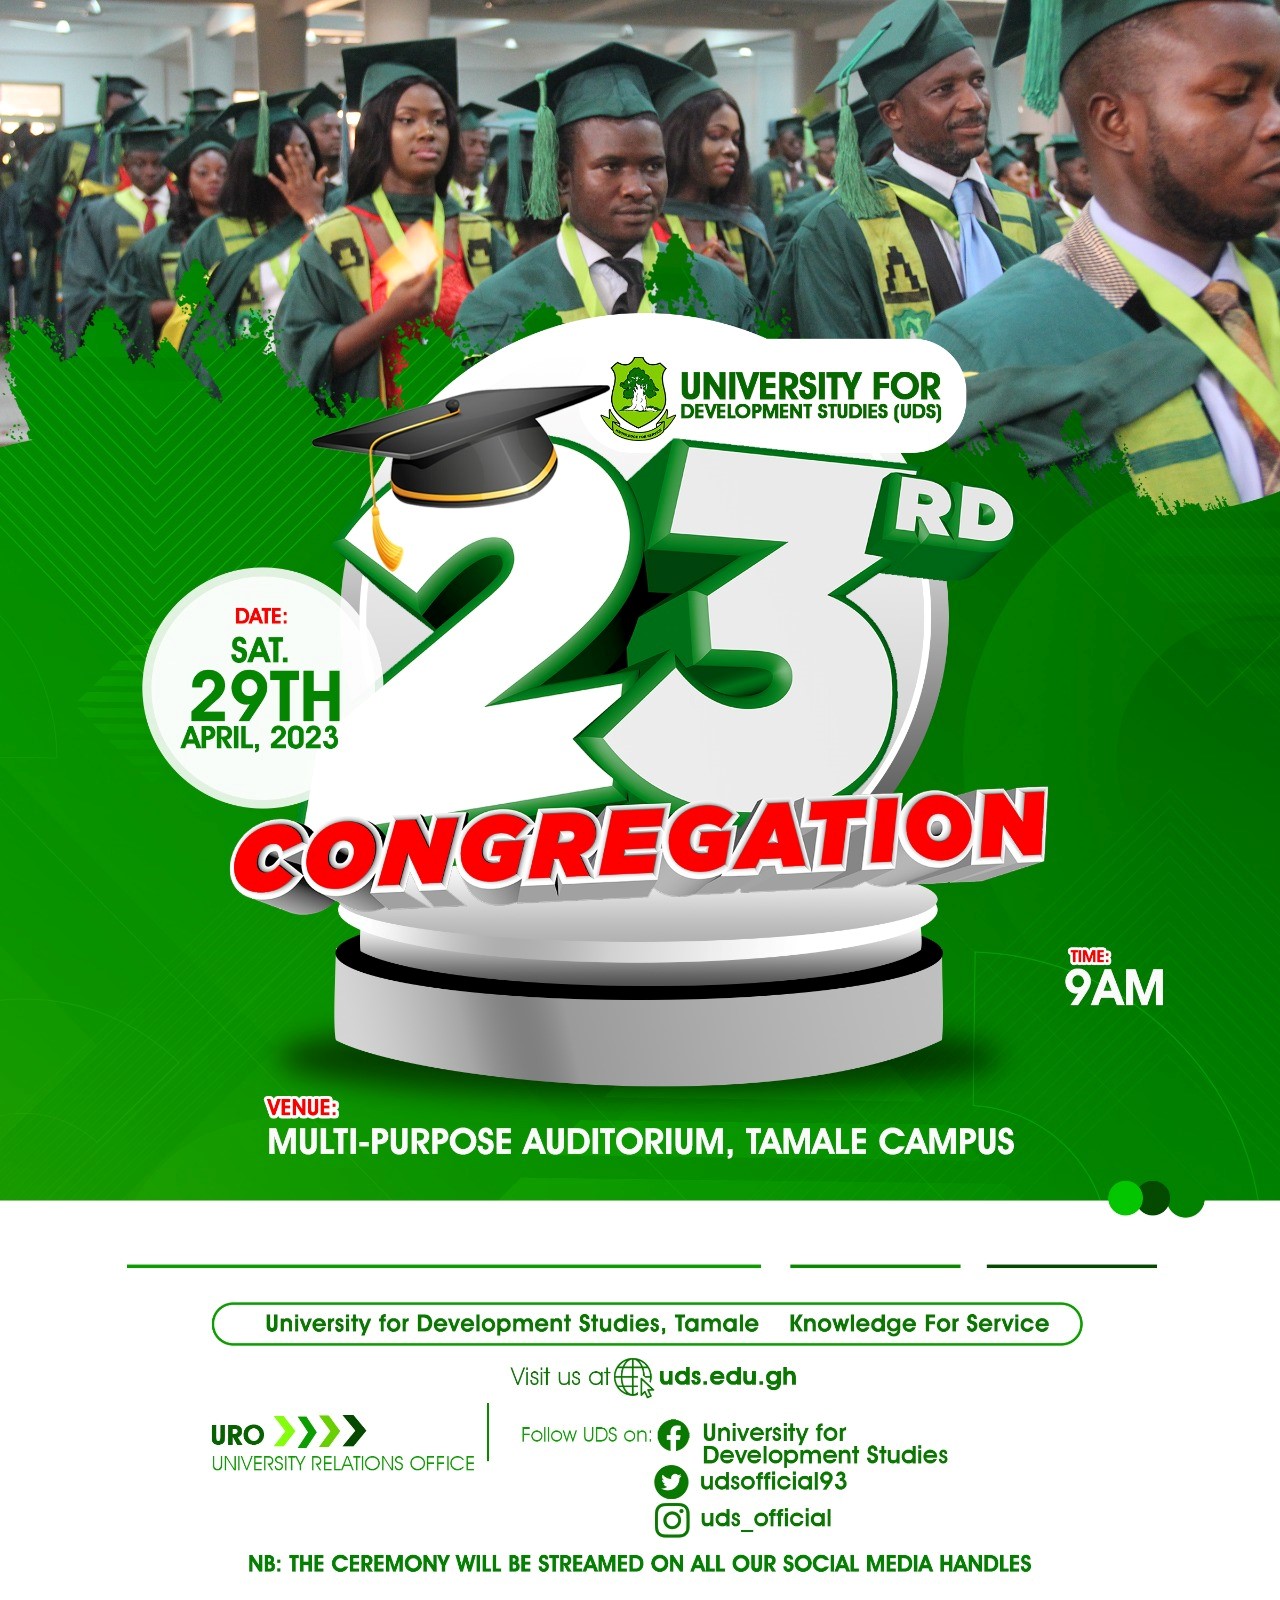 UDS Officially Confirms Saturday, 29th April 2023 As Date For Congregation